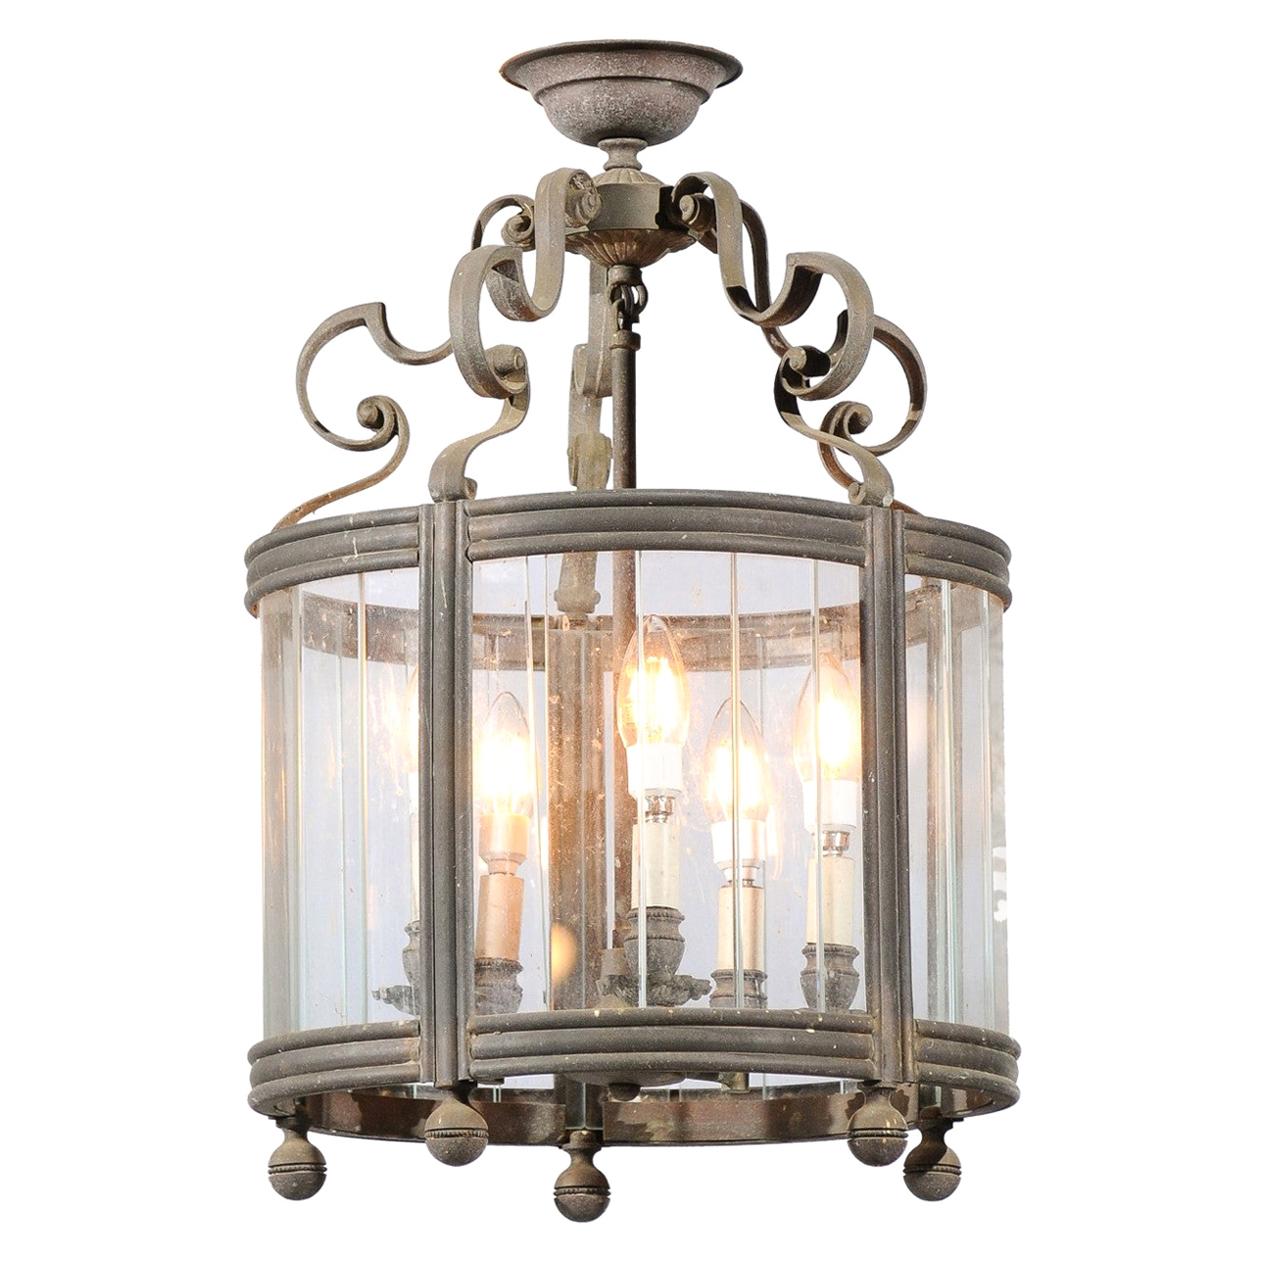 French 19th Century Five-Light Iron and Glass Lantern with Scrolling Accents